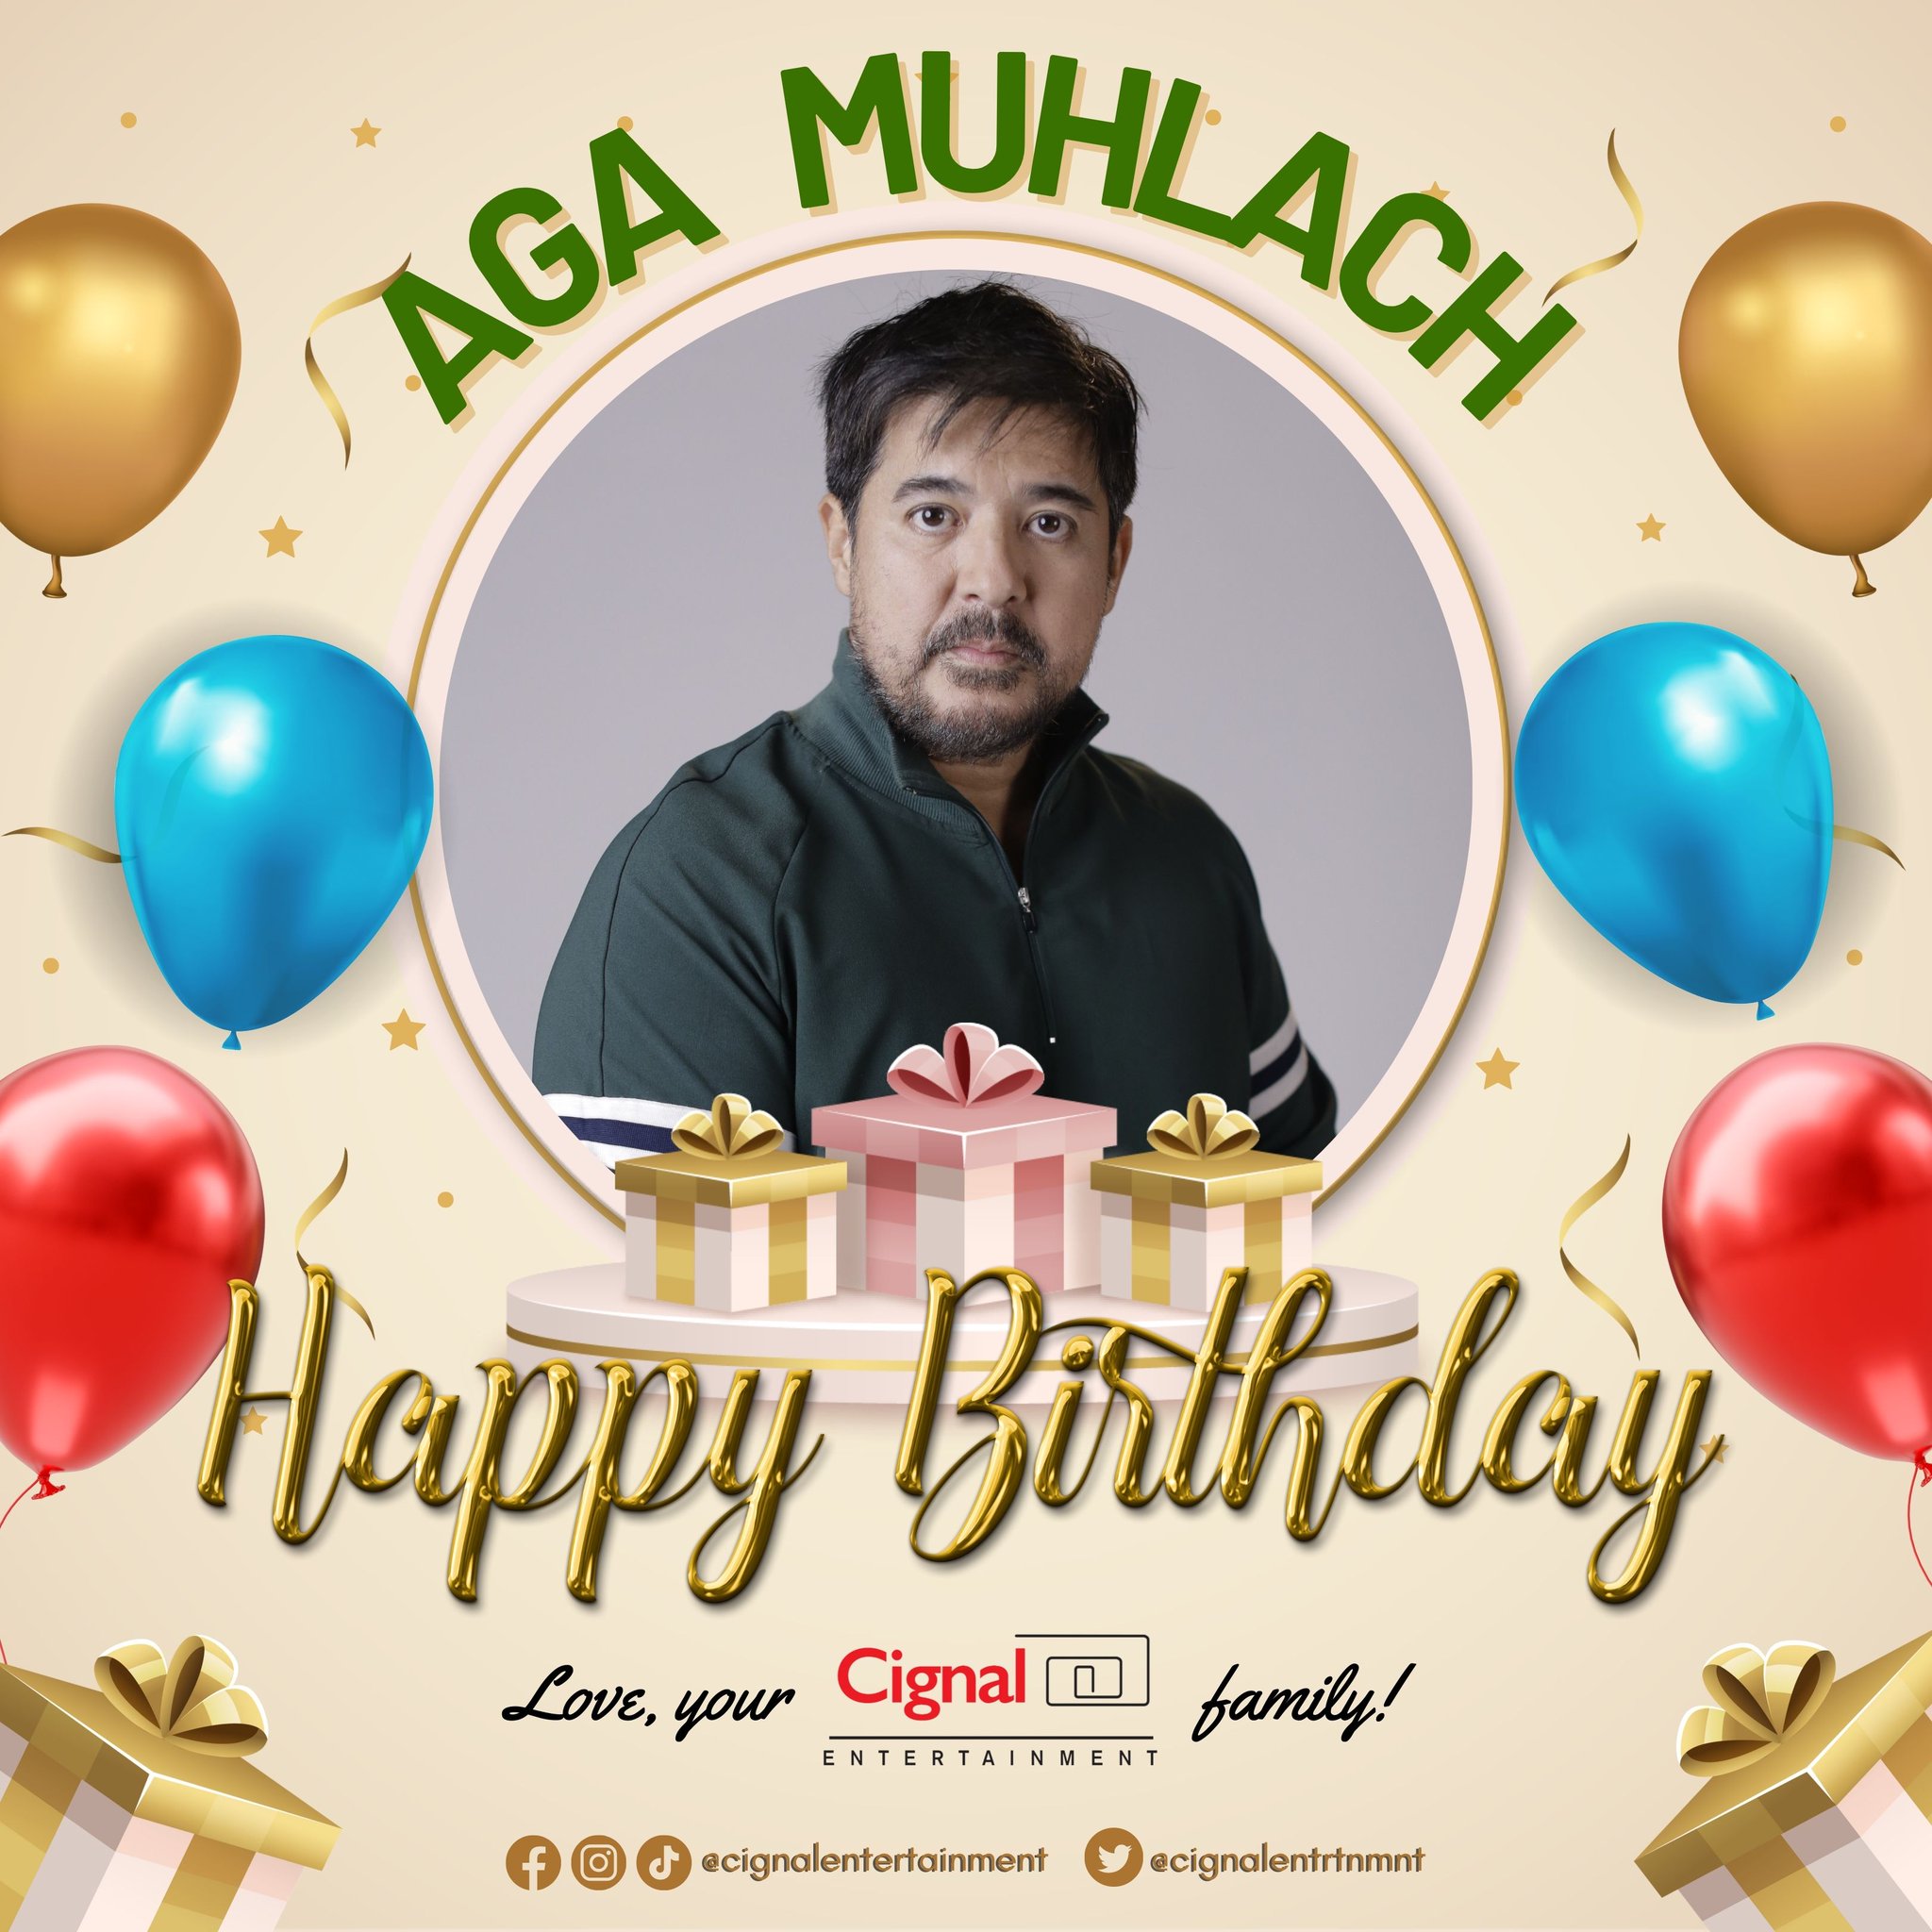 Happy birthday, Mr. Aga Muhlach! Your Cignal Entertainment family wishes you all the best!   